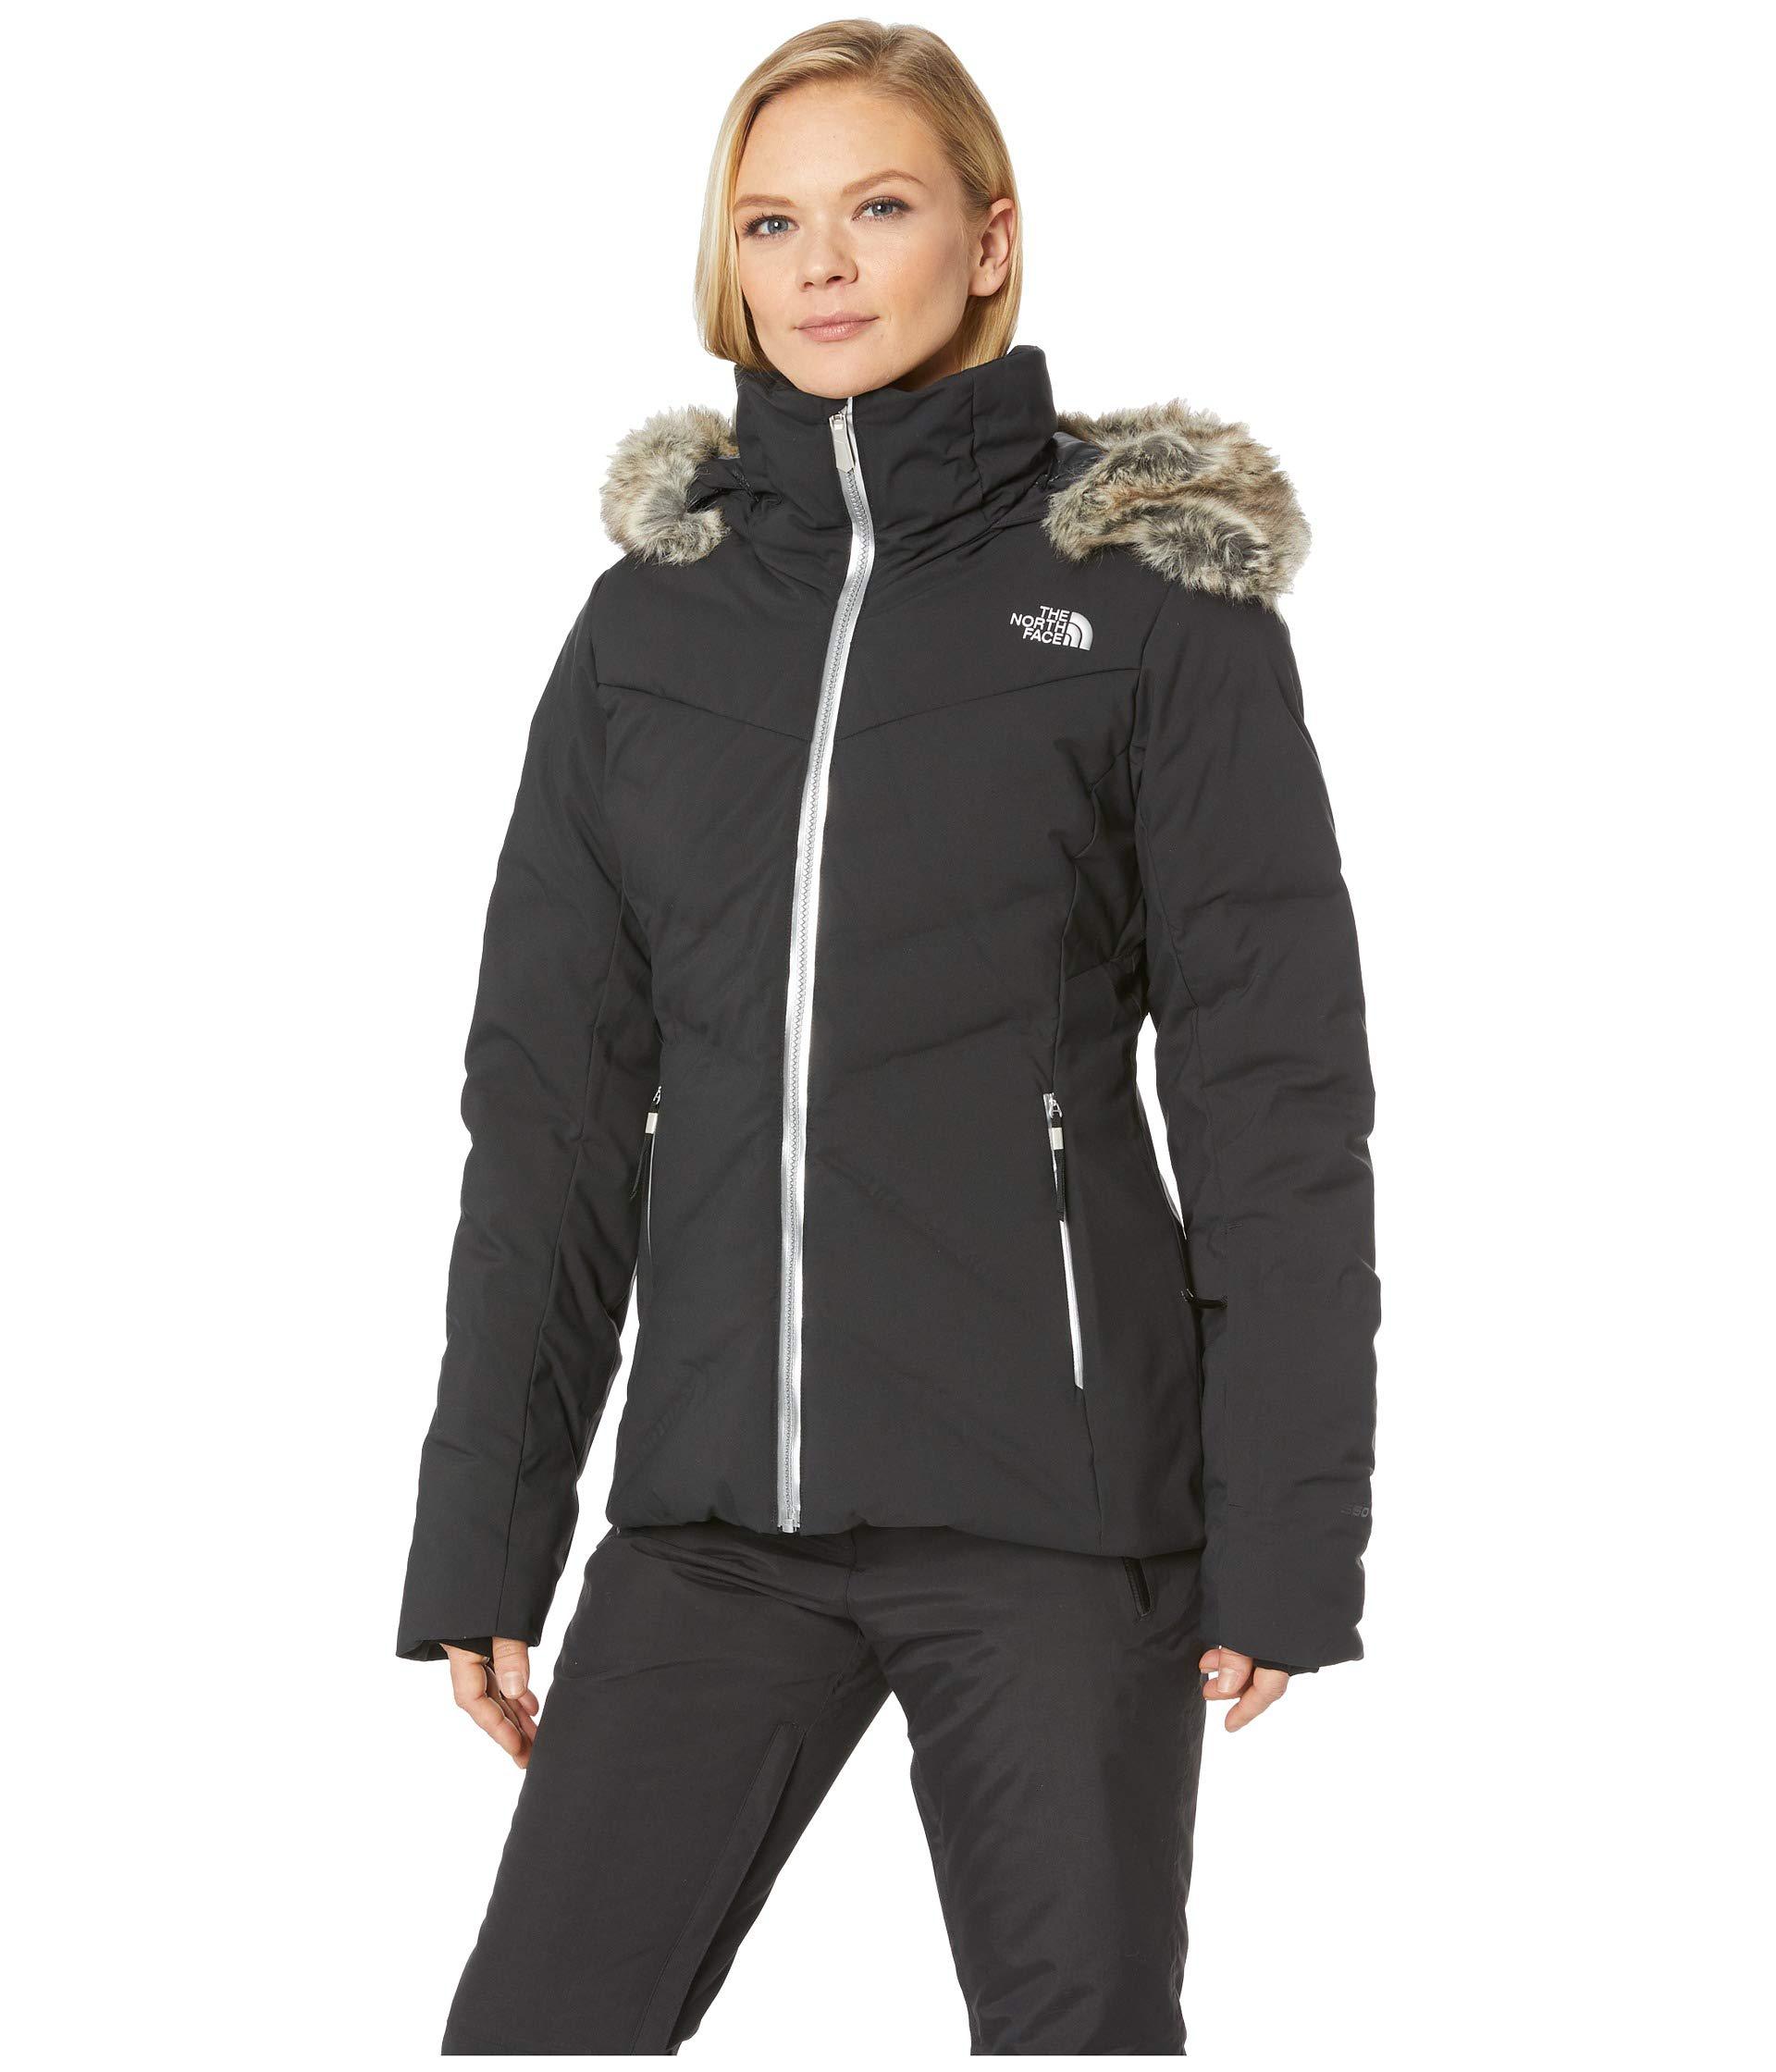 Lyst - The North Face Cirque Down Jacket (tnf Black) Women's Coat in Black